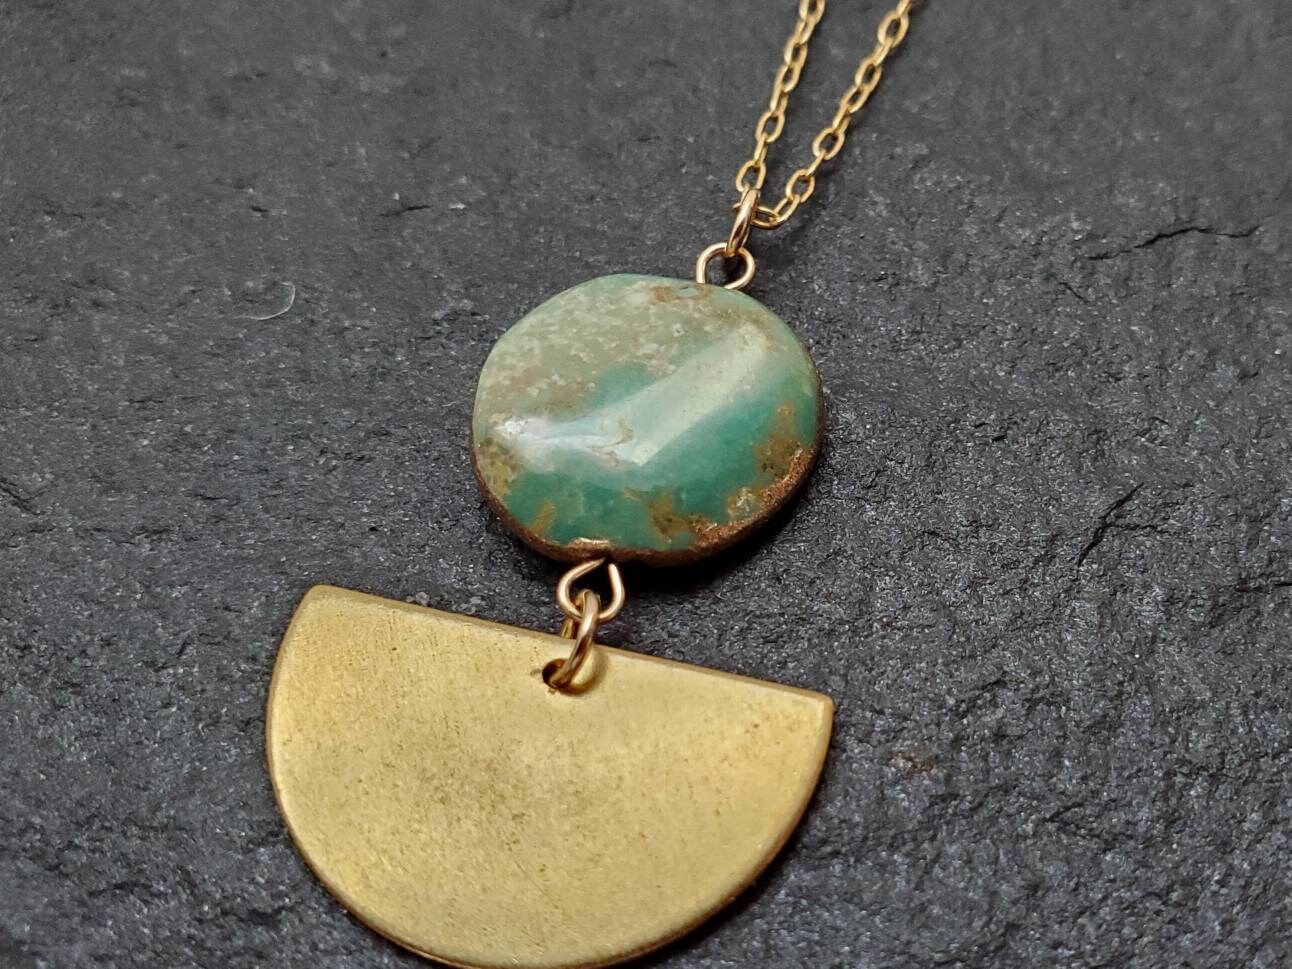 Turquoise Stone + Raw Brass Necklace; Round Turquoise Stone Necklace; Dainty Brass Crescent Half Moon Necklace; Real Genuine Turquoise